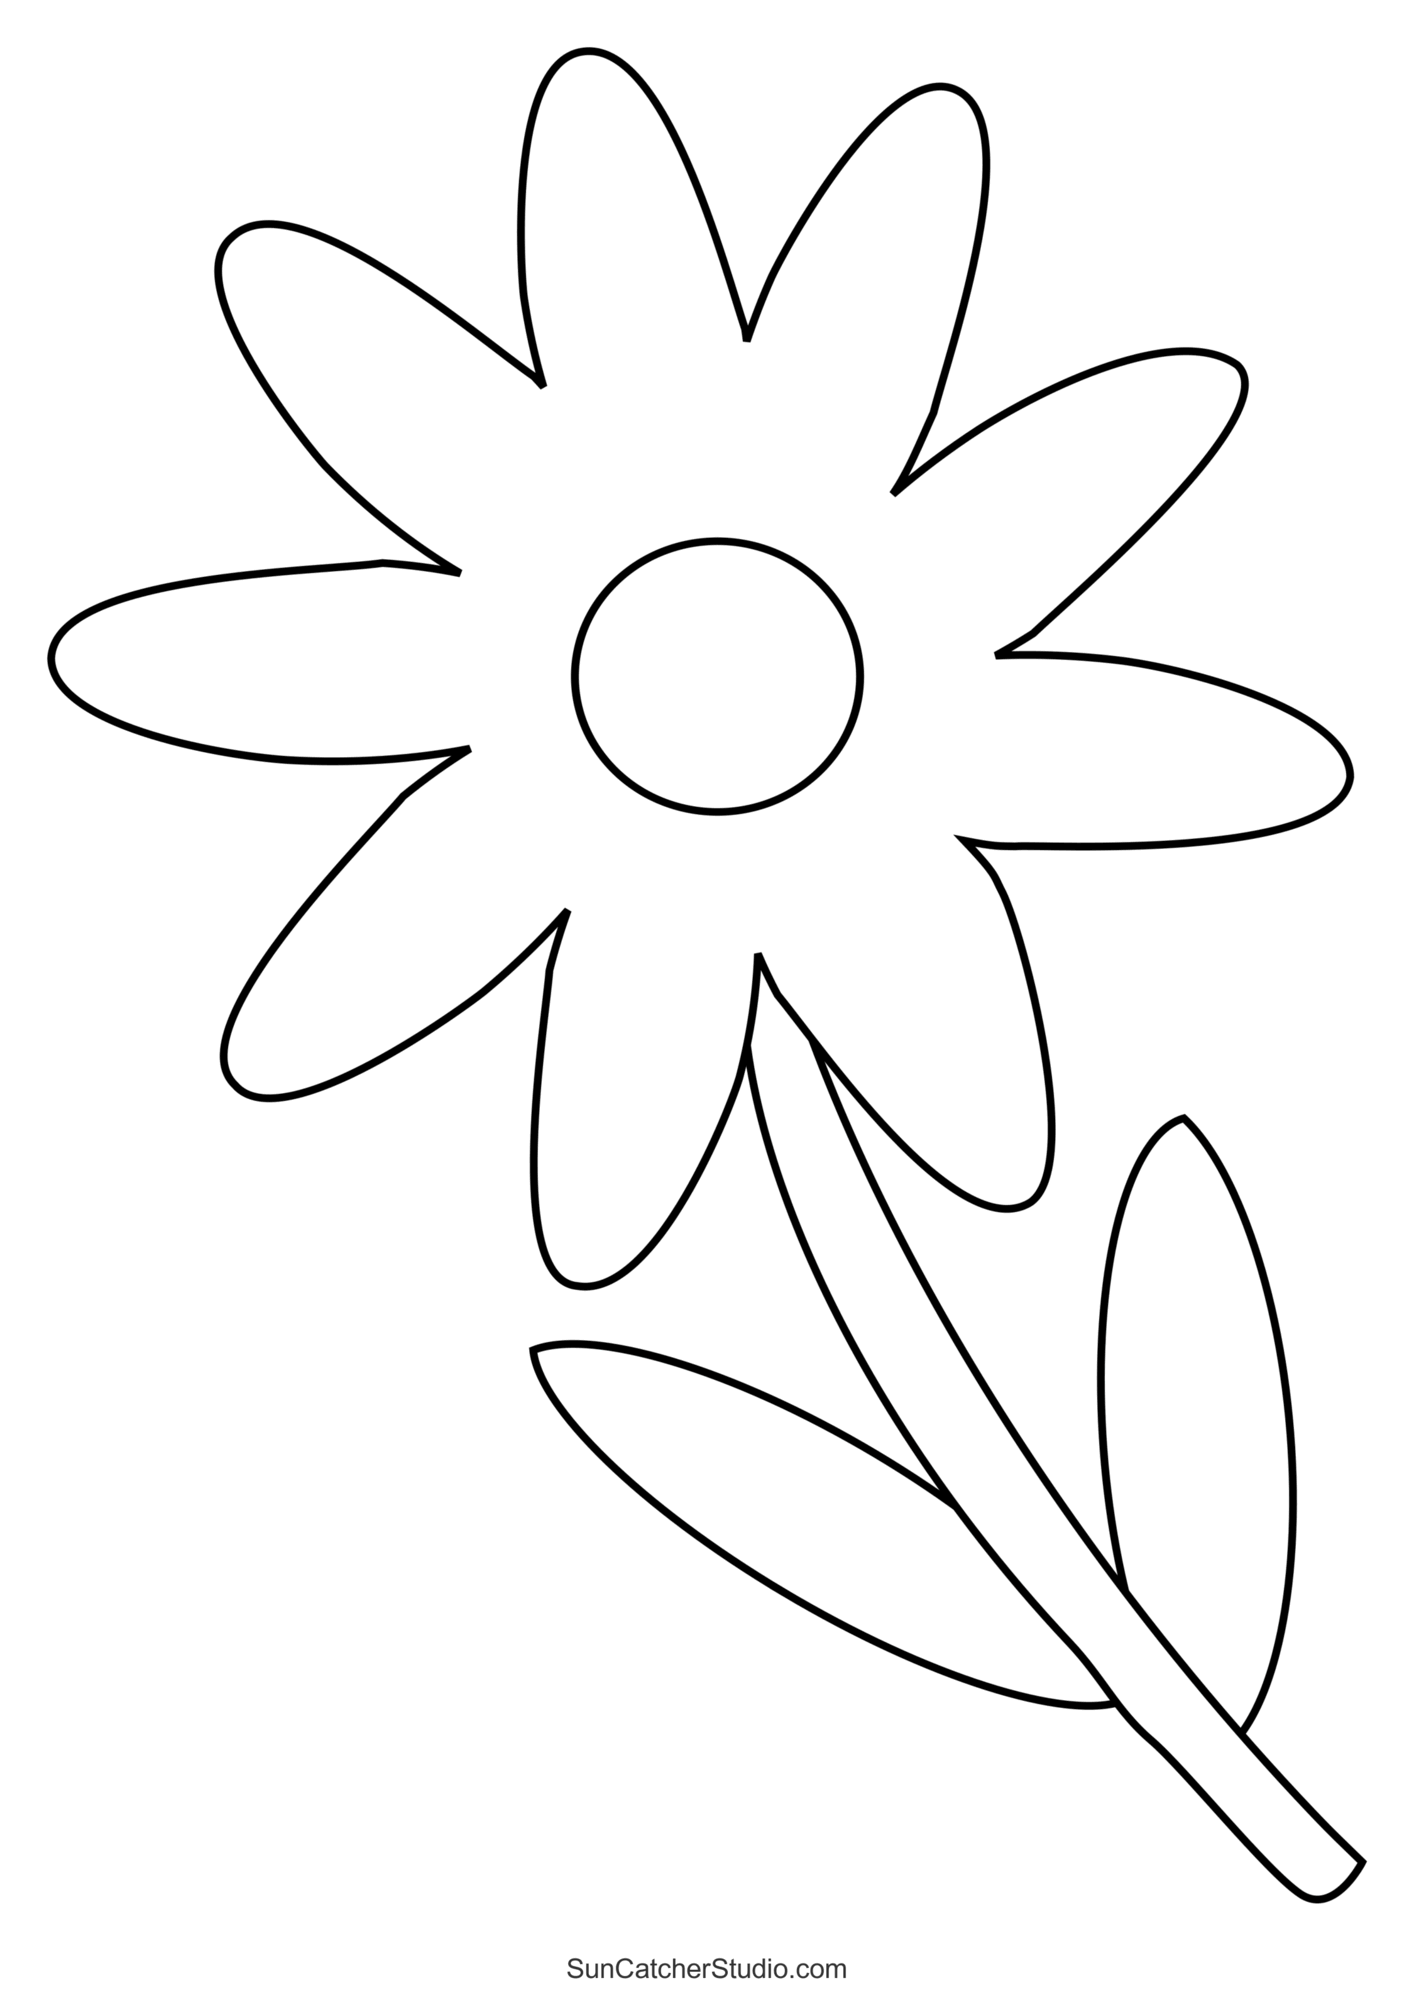 Image result for printable flower template cut out  Flower templates  printable, Flower template, Flower templates printable free